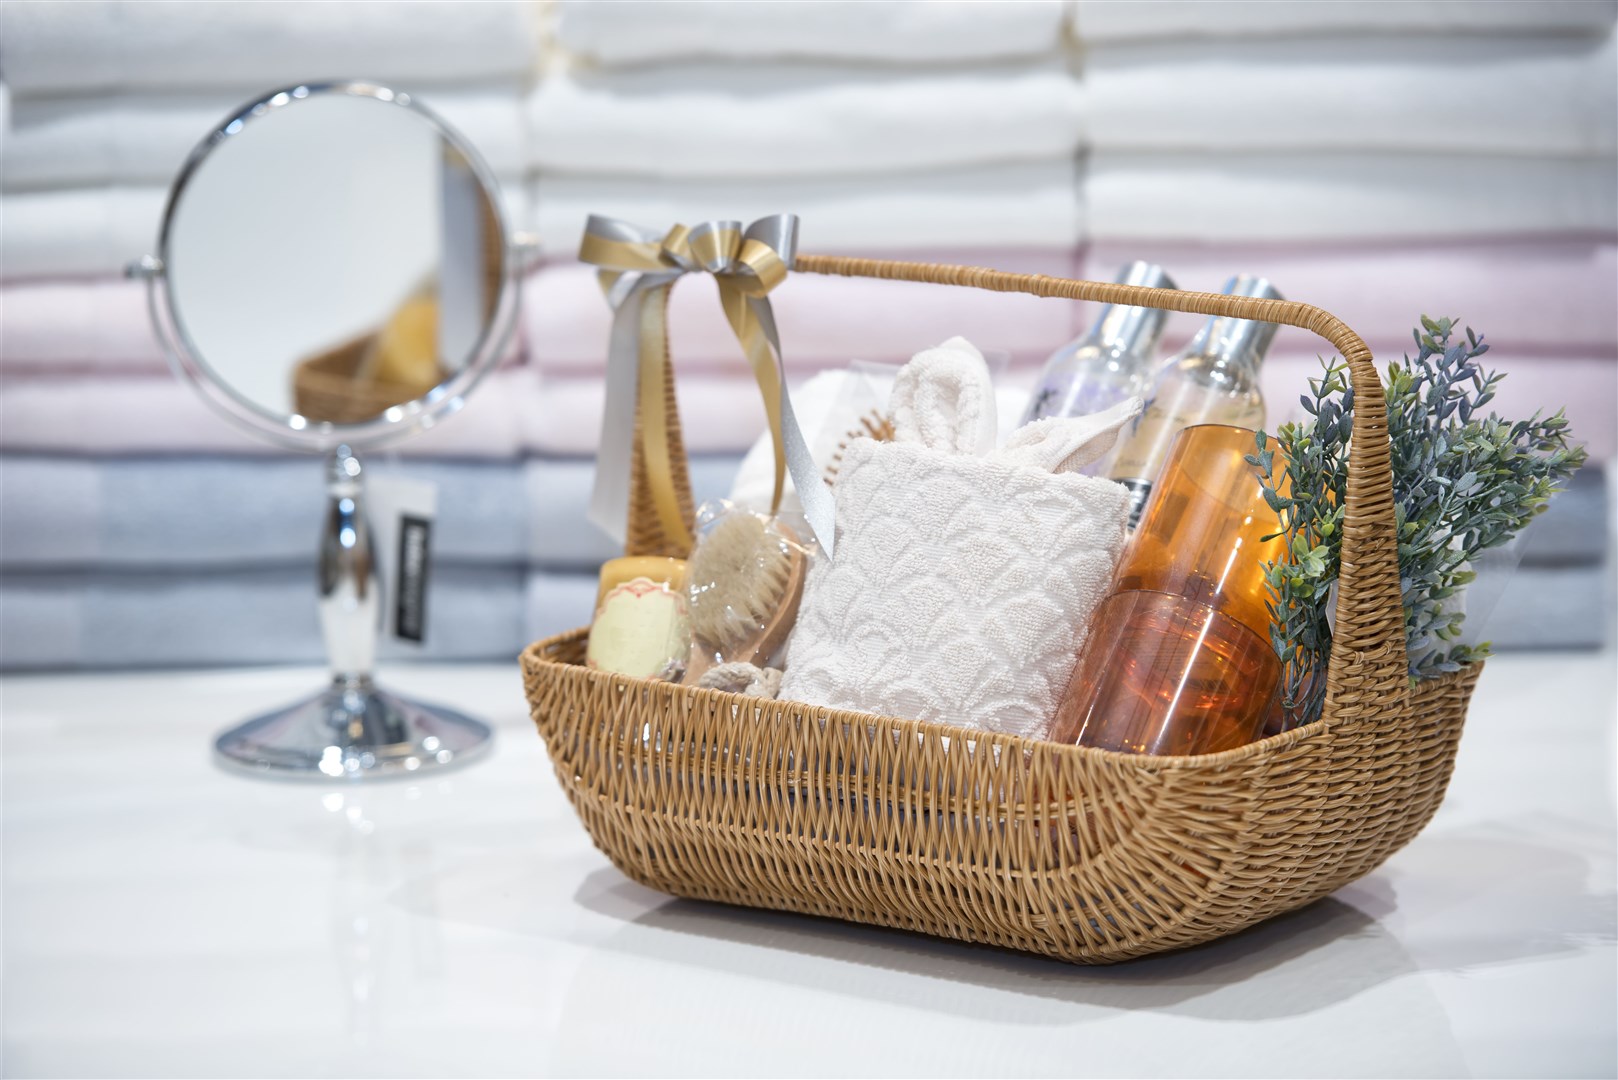 A personalised pamper hamper is a perfect gift to treat the special woman in your life.